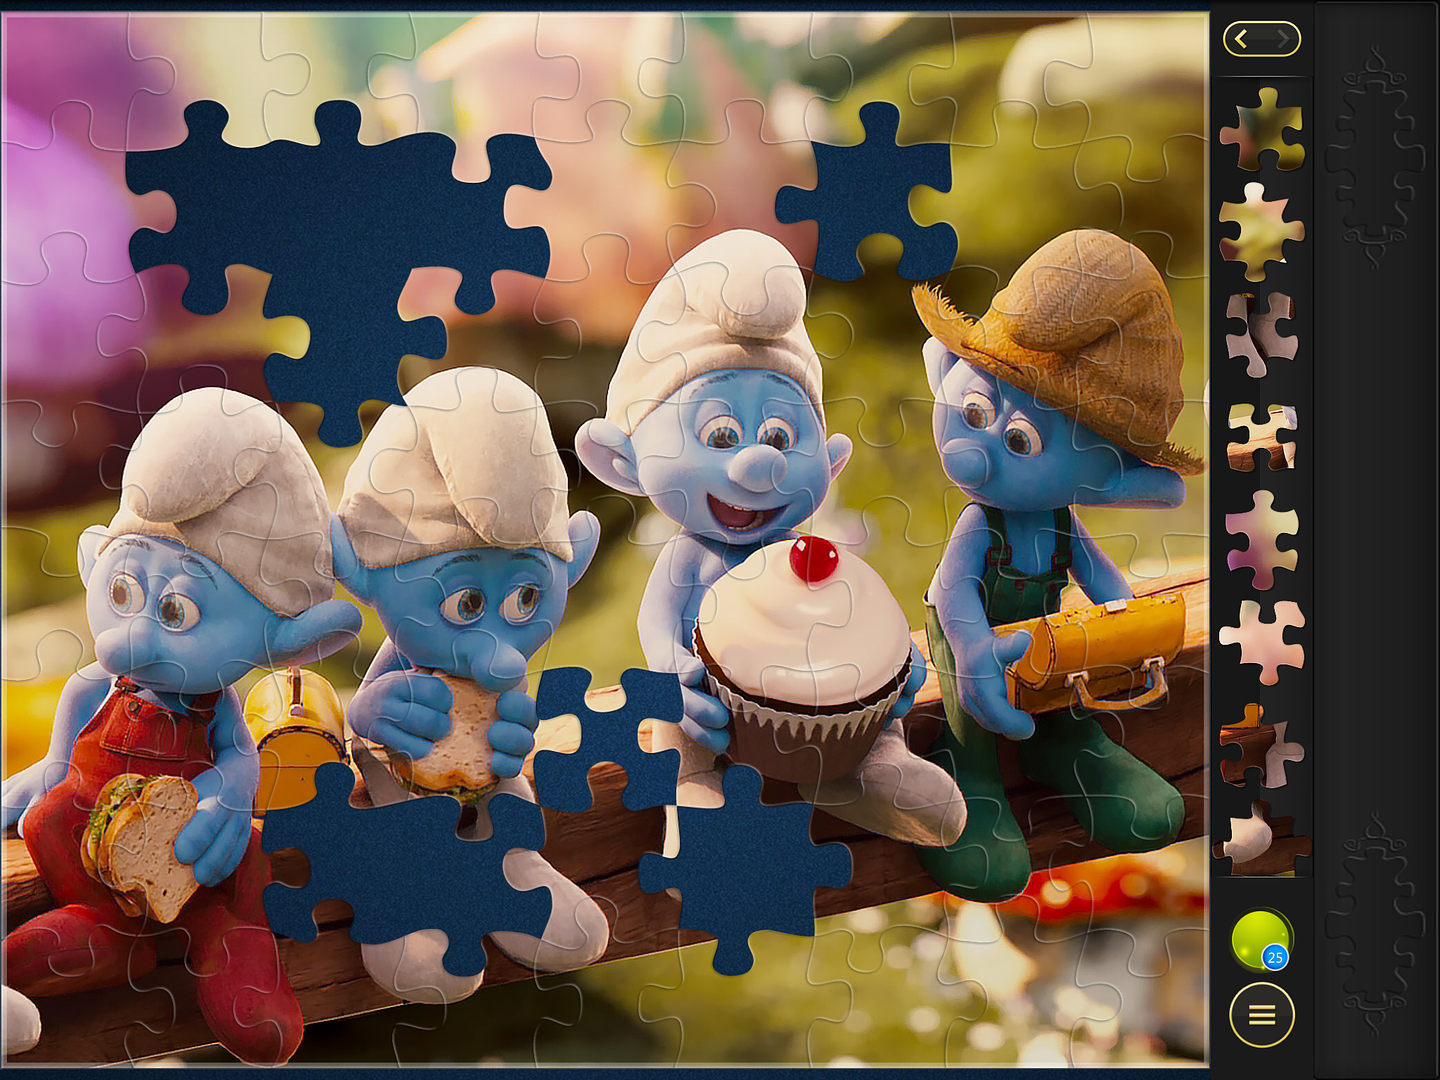 Magic Jigsaw Puzzles now offers puzzles featuring kids' favorite animated Sony Pictures like Smurfs | sponsor | cool mom tech